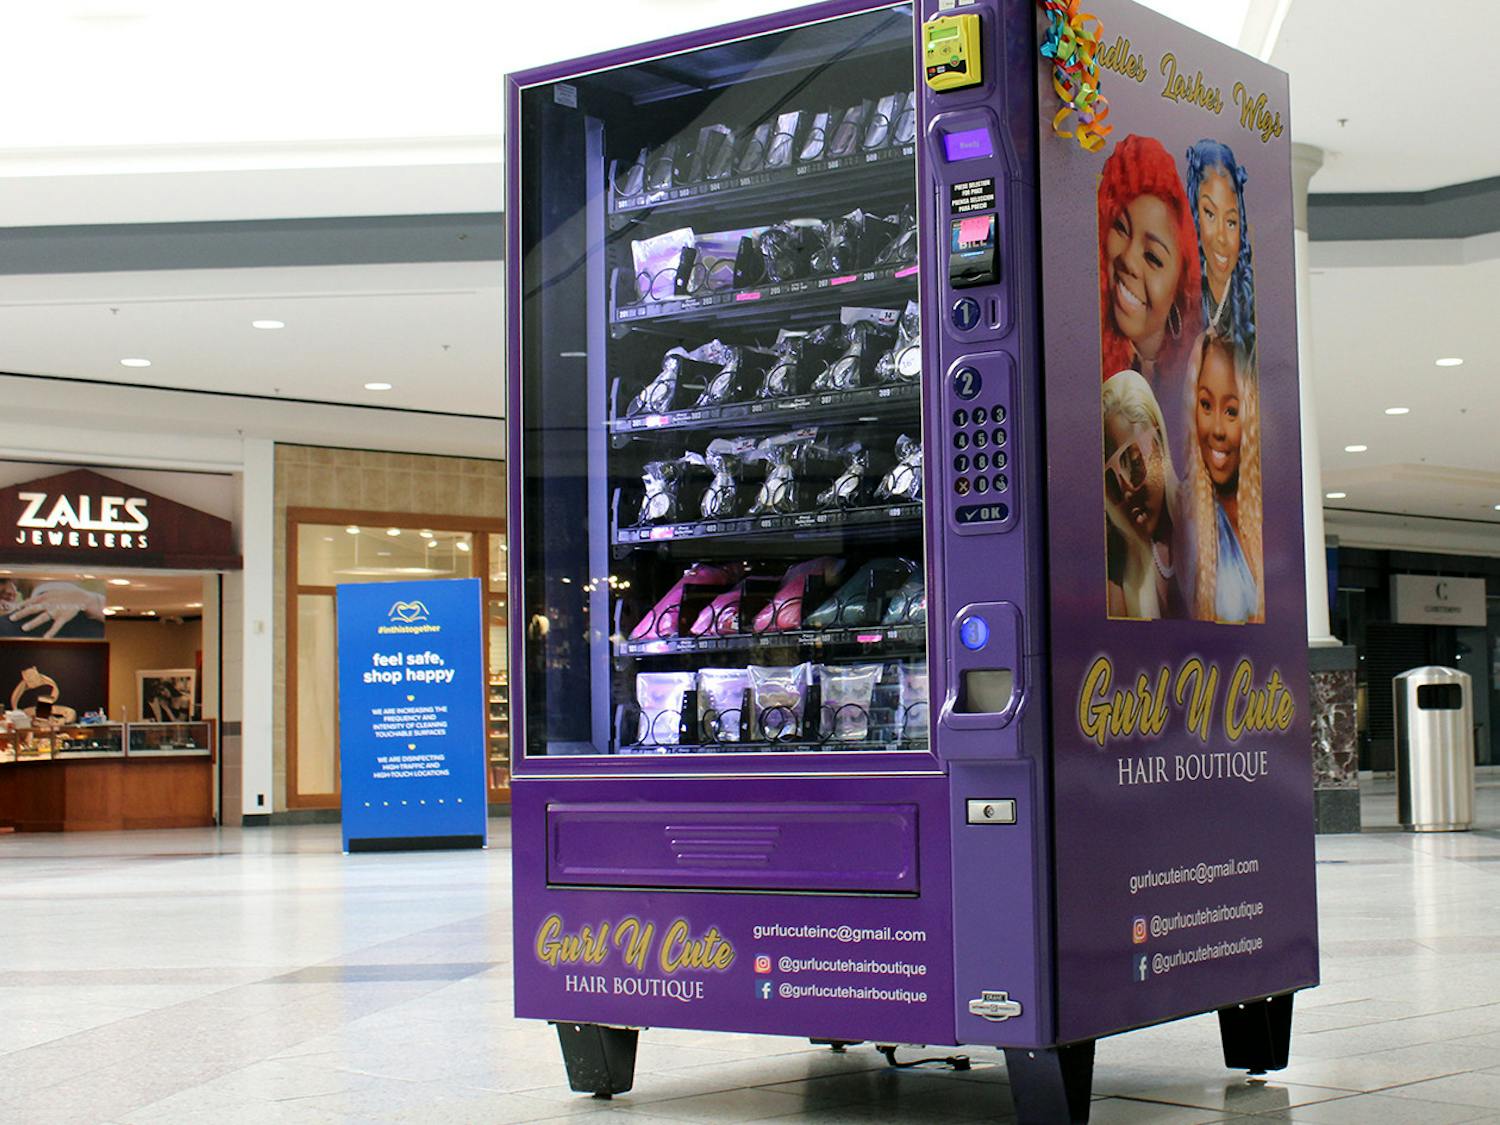 A purple vending machine owned by the Gurl U Cute Hair Boutique sits near the entrance of Oaks Mall in Gainesville on Thursday, Feb. 18, 2021. The vending machine has wig bundles and false lashes for purchase.